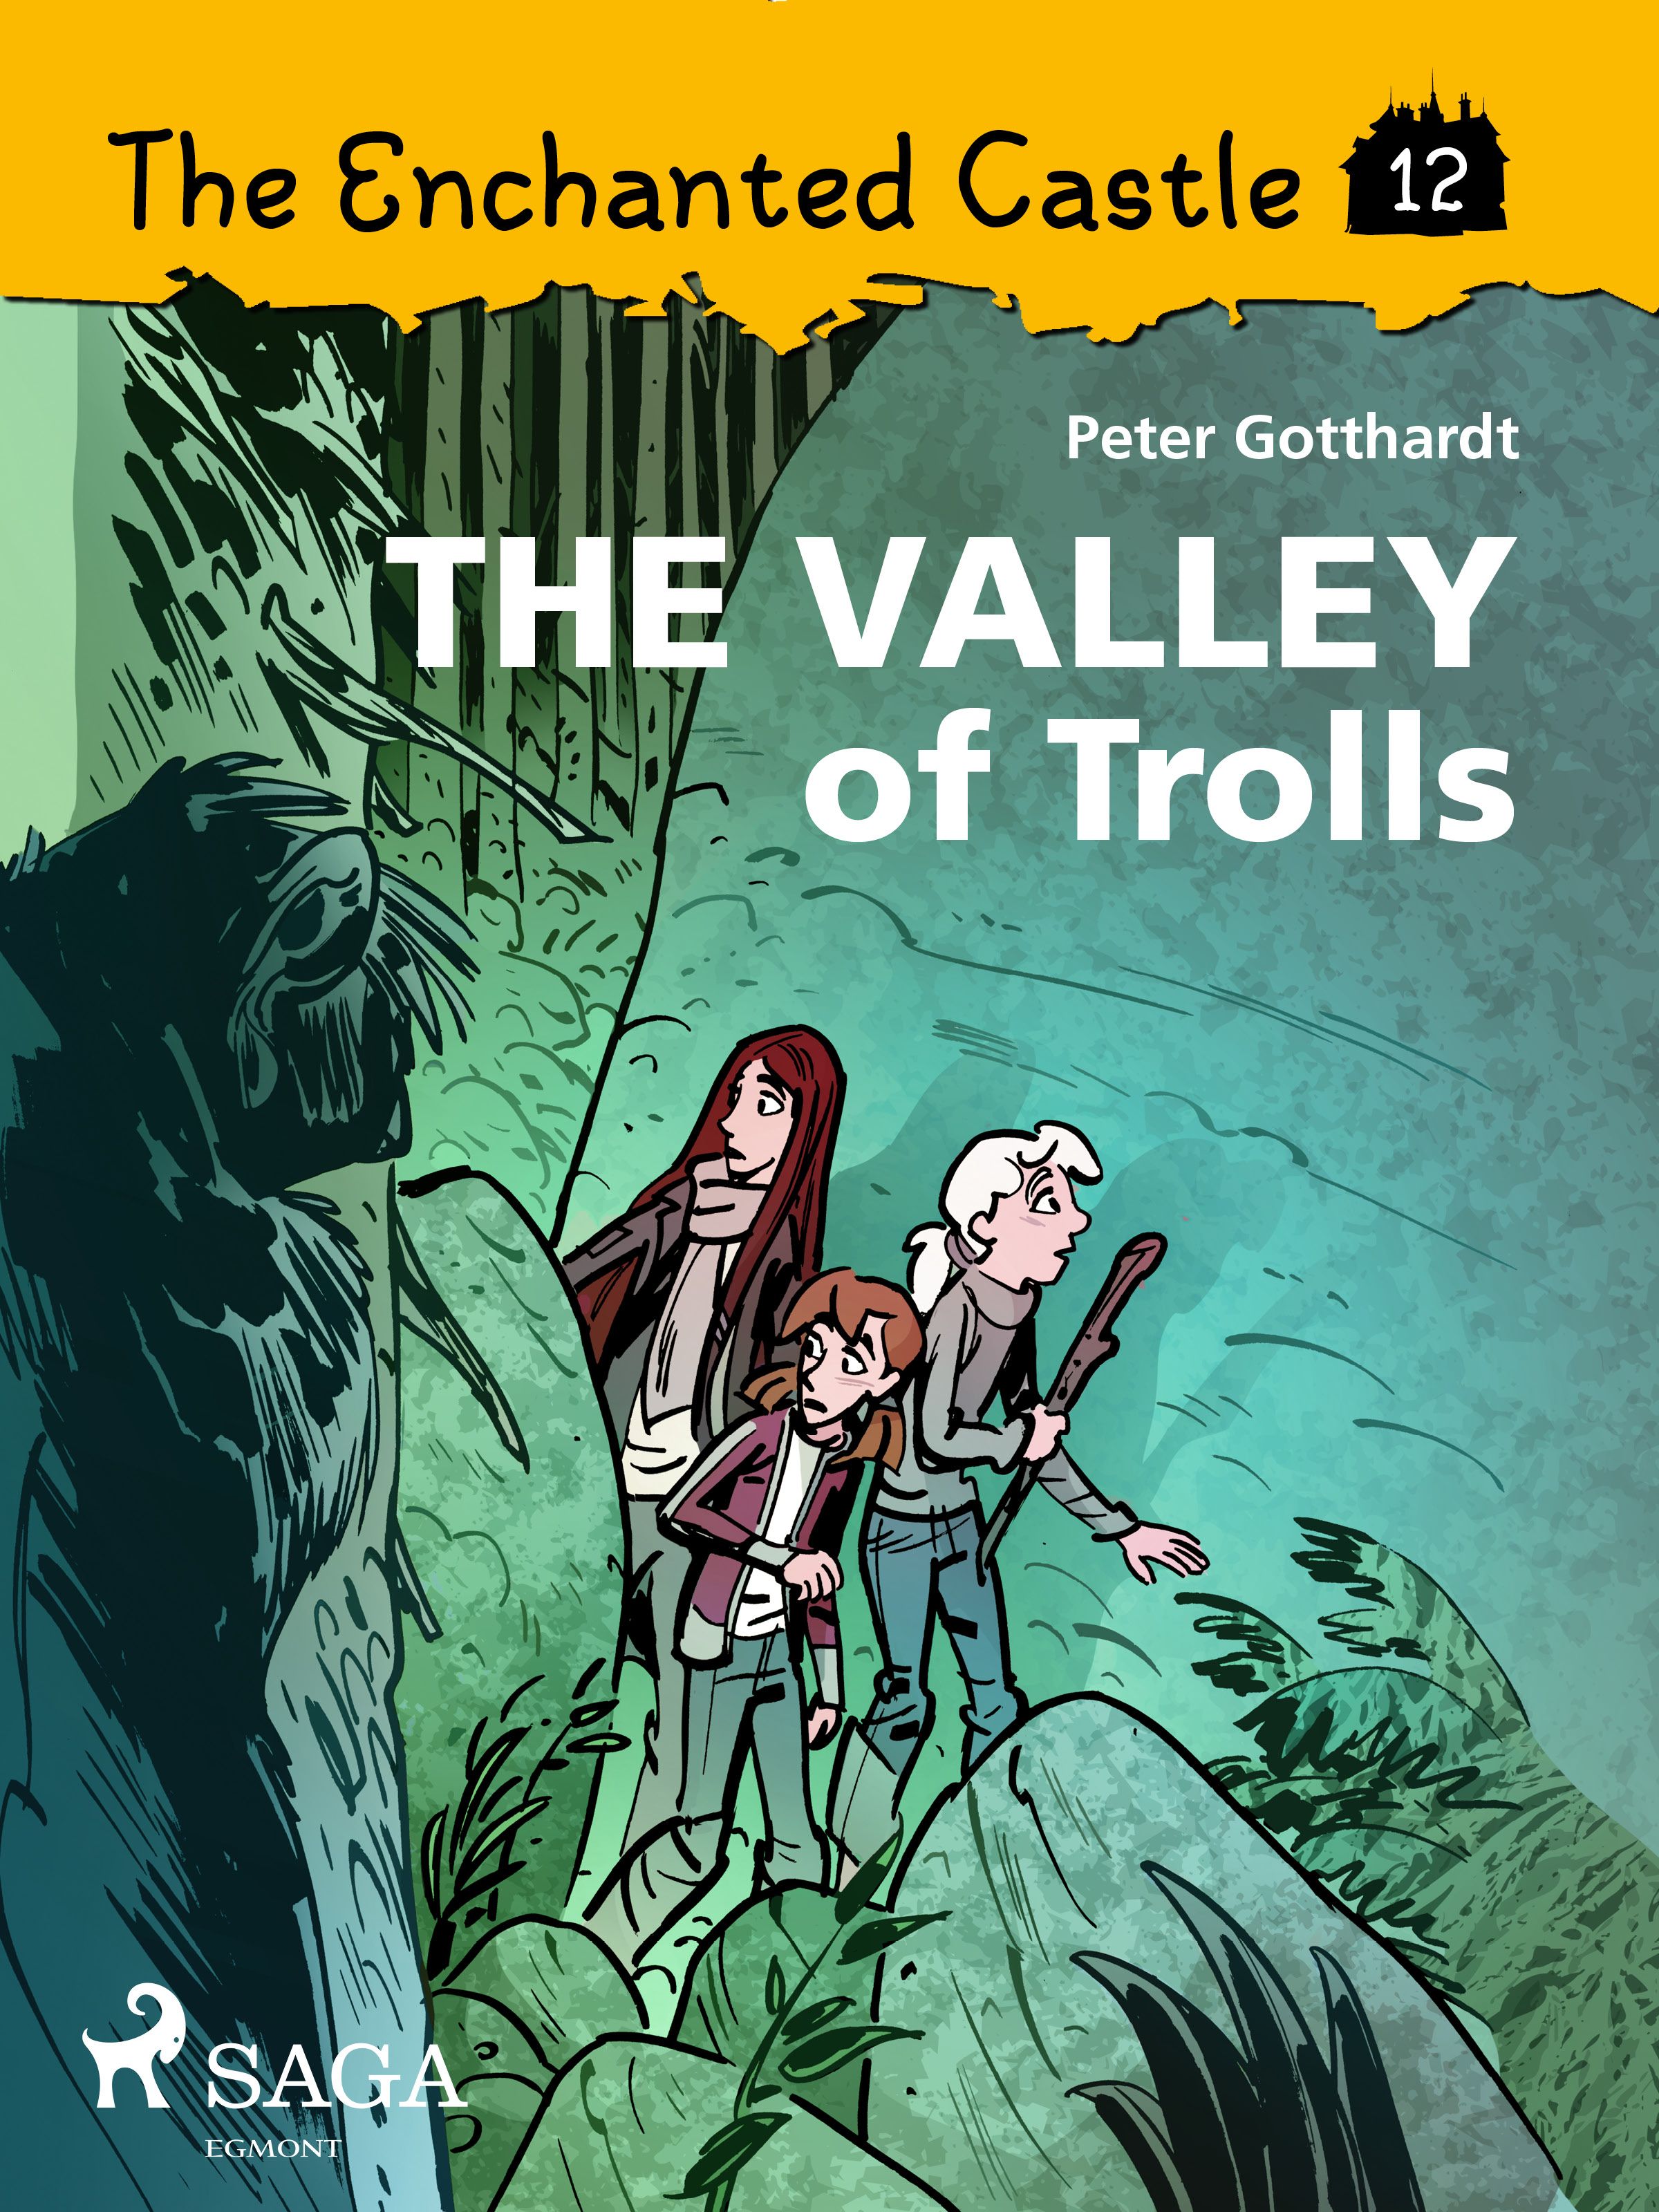 The Enchanted Castle 12 - The Valley of Trolls, eBook by Peter Gotthardt